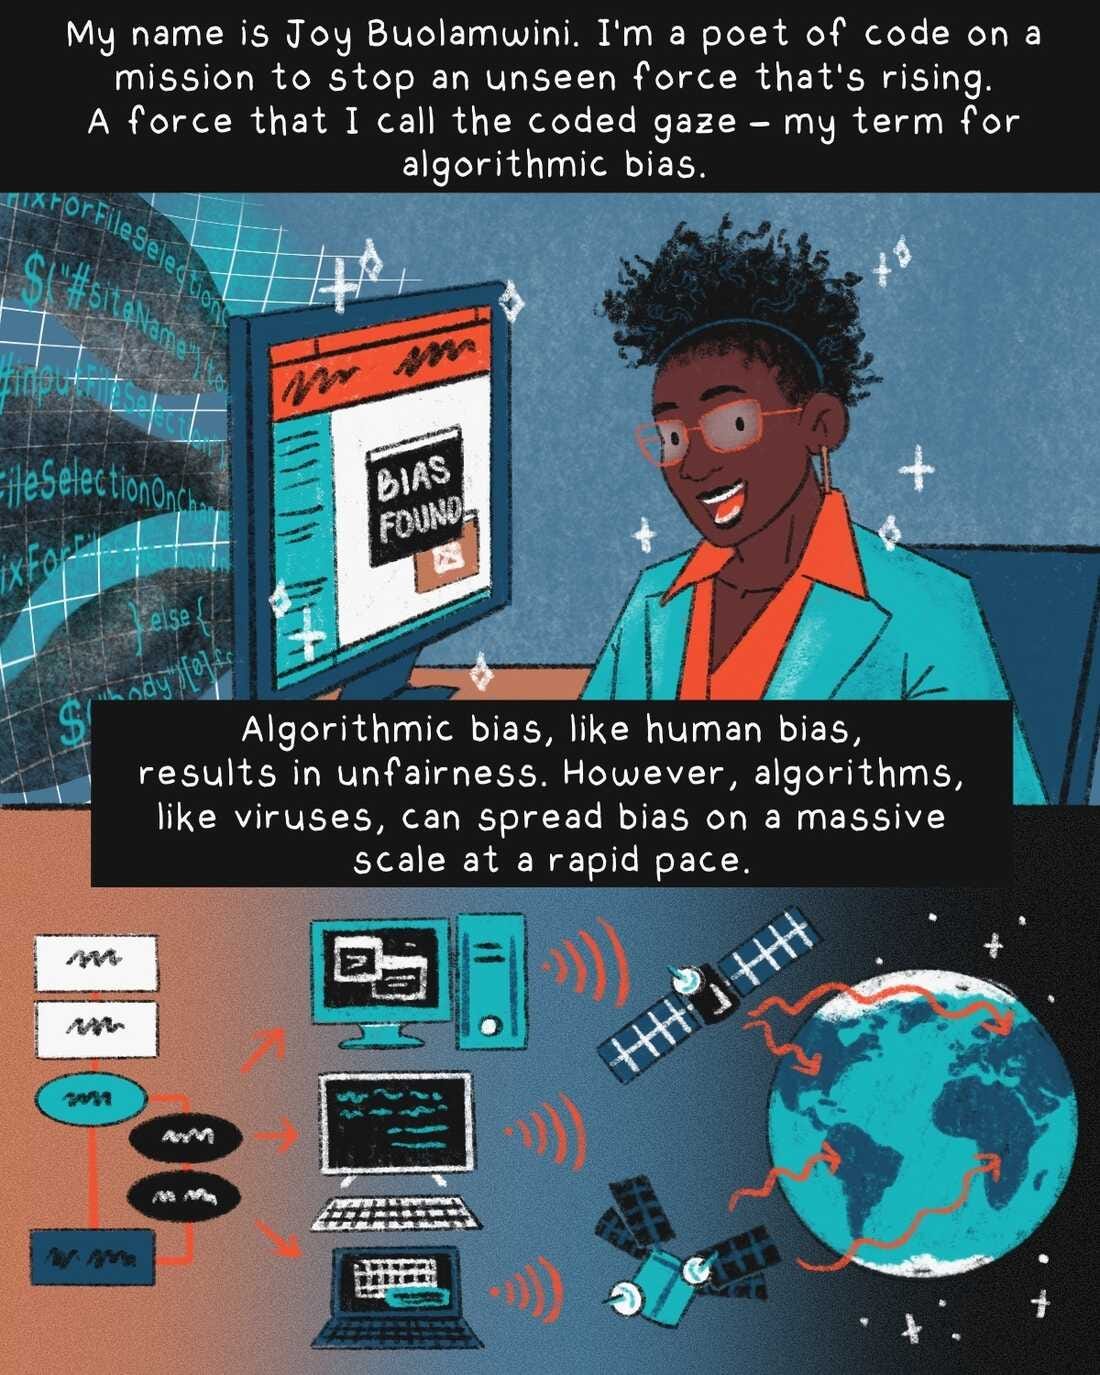 Panel 1: "My name is Joy Buolamwini. I'm a poet of code on a mission to stop an unseen force that's rising. A force that I call the coded gaze – my term for algorithmic bias. Algorithmic bias, like human bias, results in unfairness. However, algorithms, like viruses, can spread bias on a massive scale at a rapid pace."